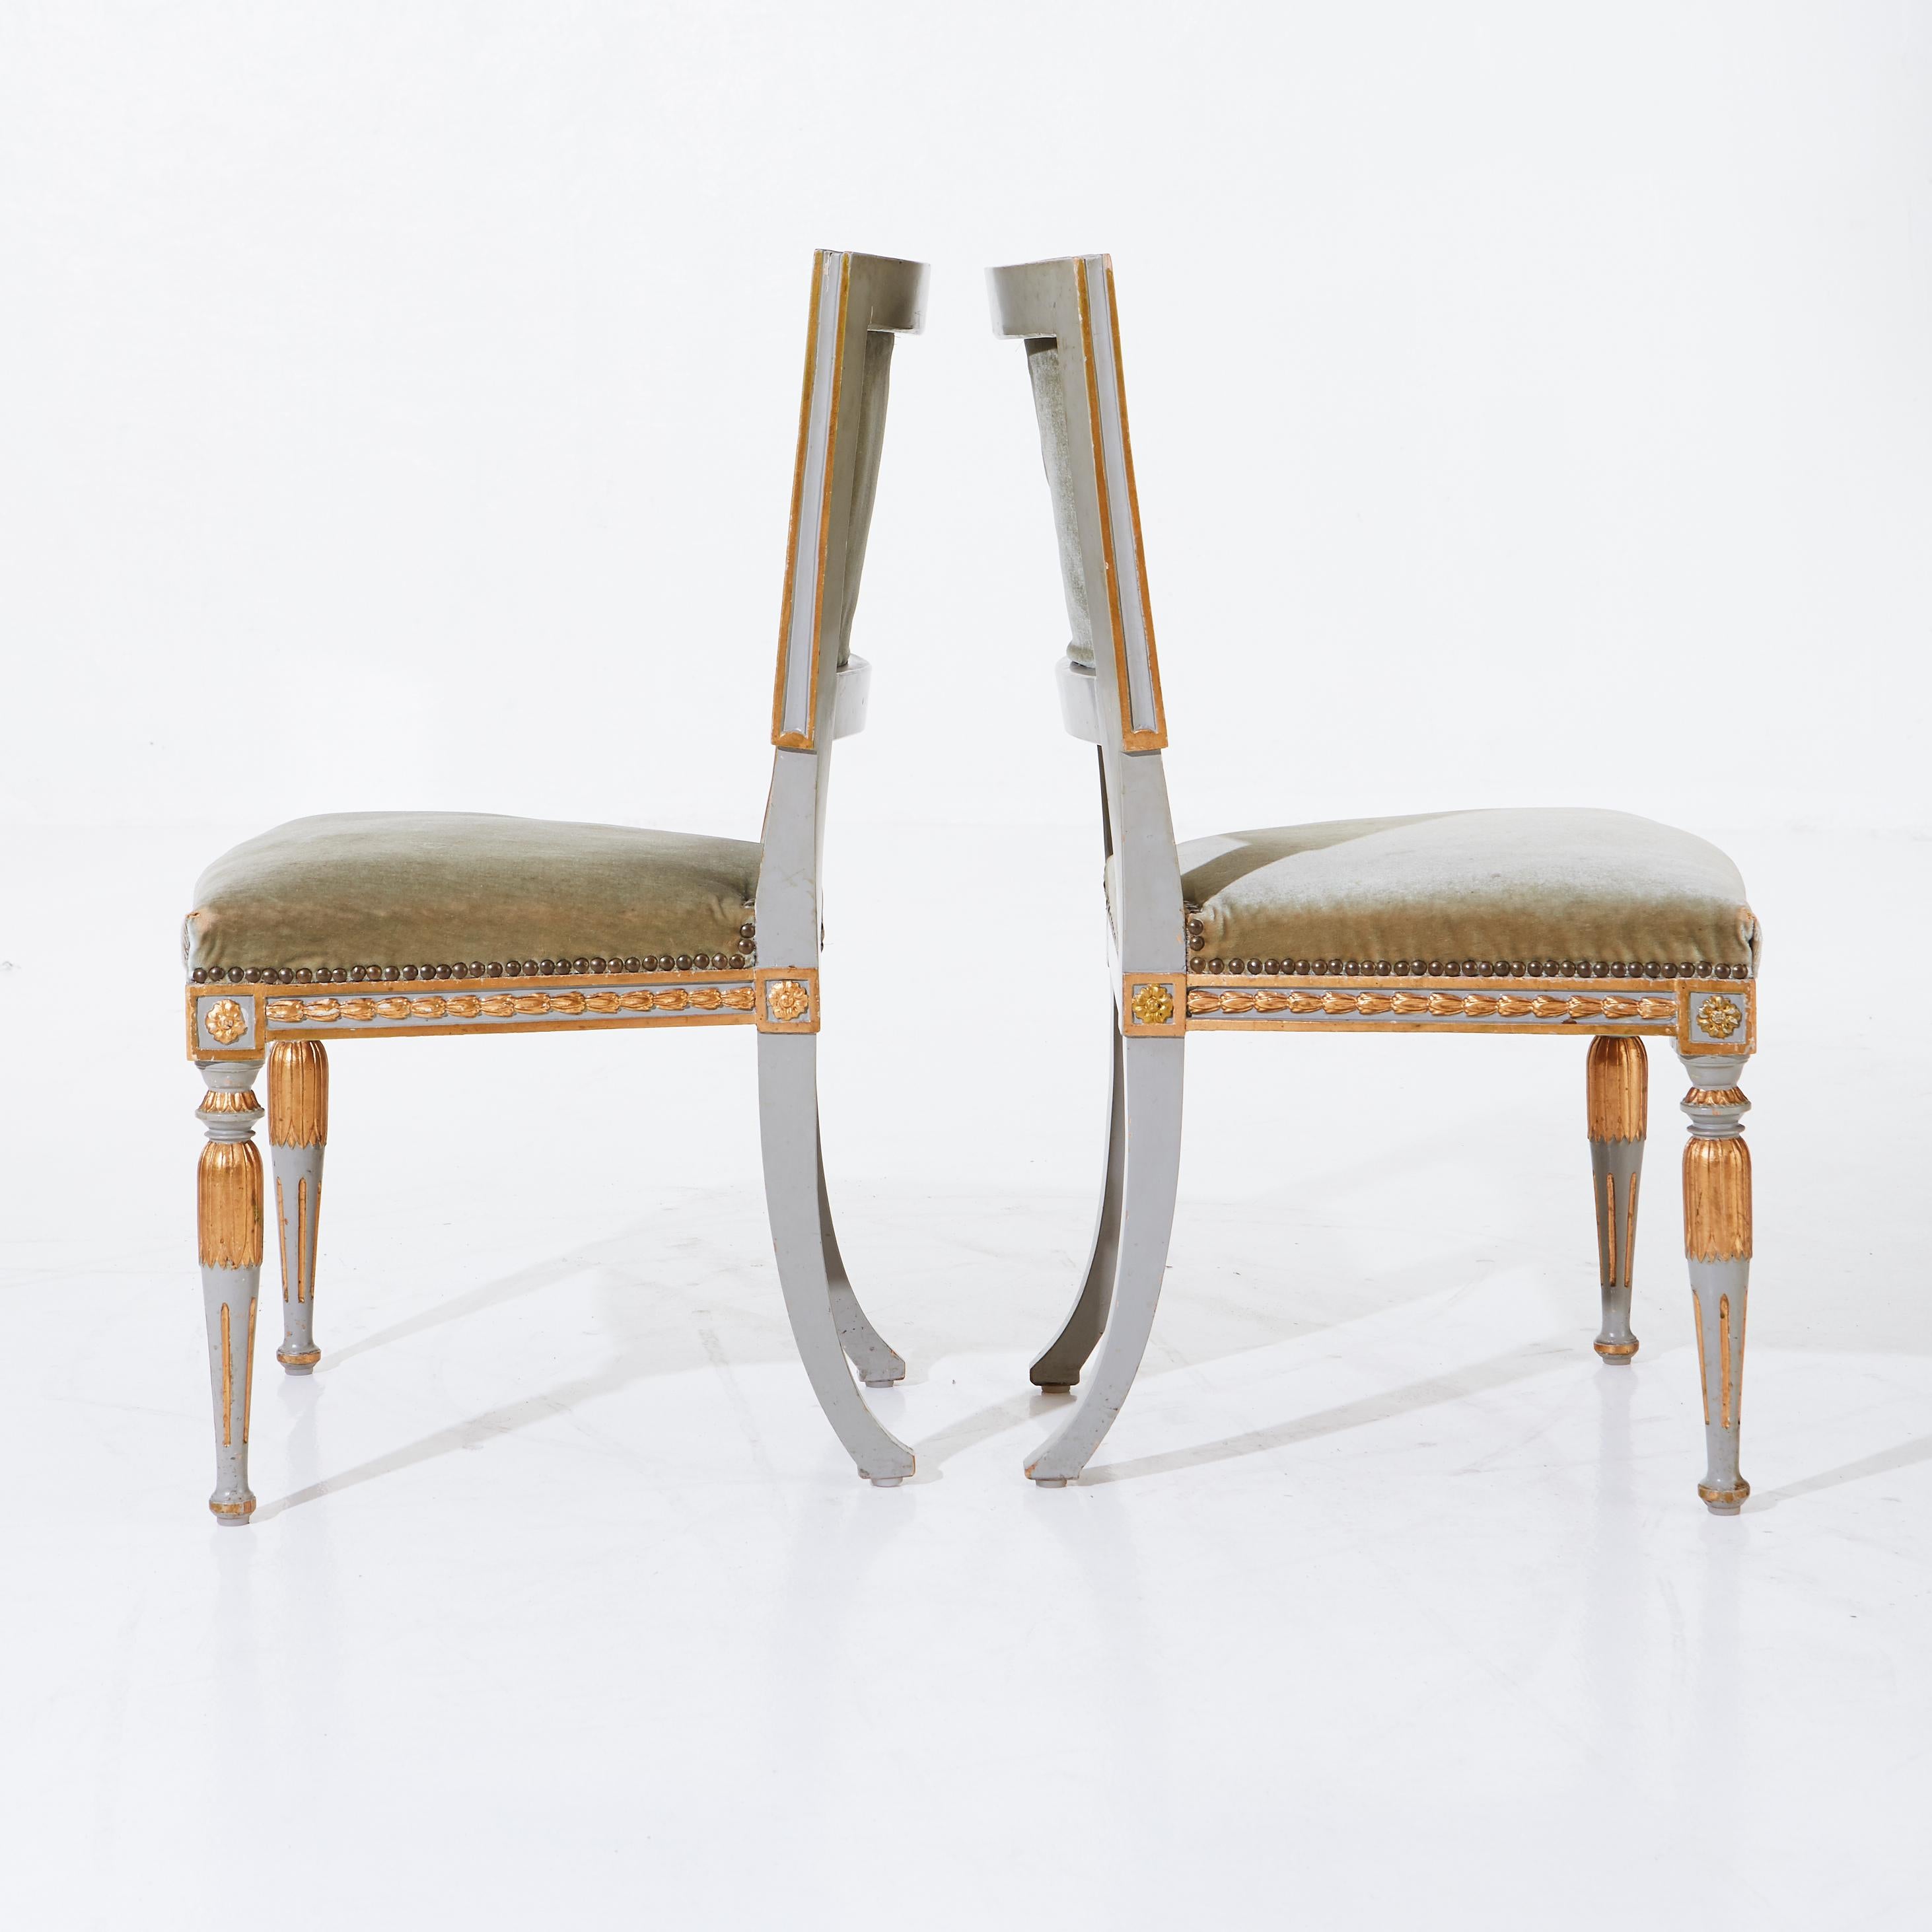 19th Century Pair of Stamped Ephraim Ståhl Late Gustavian Chairs, circa 1800, Stockholm